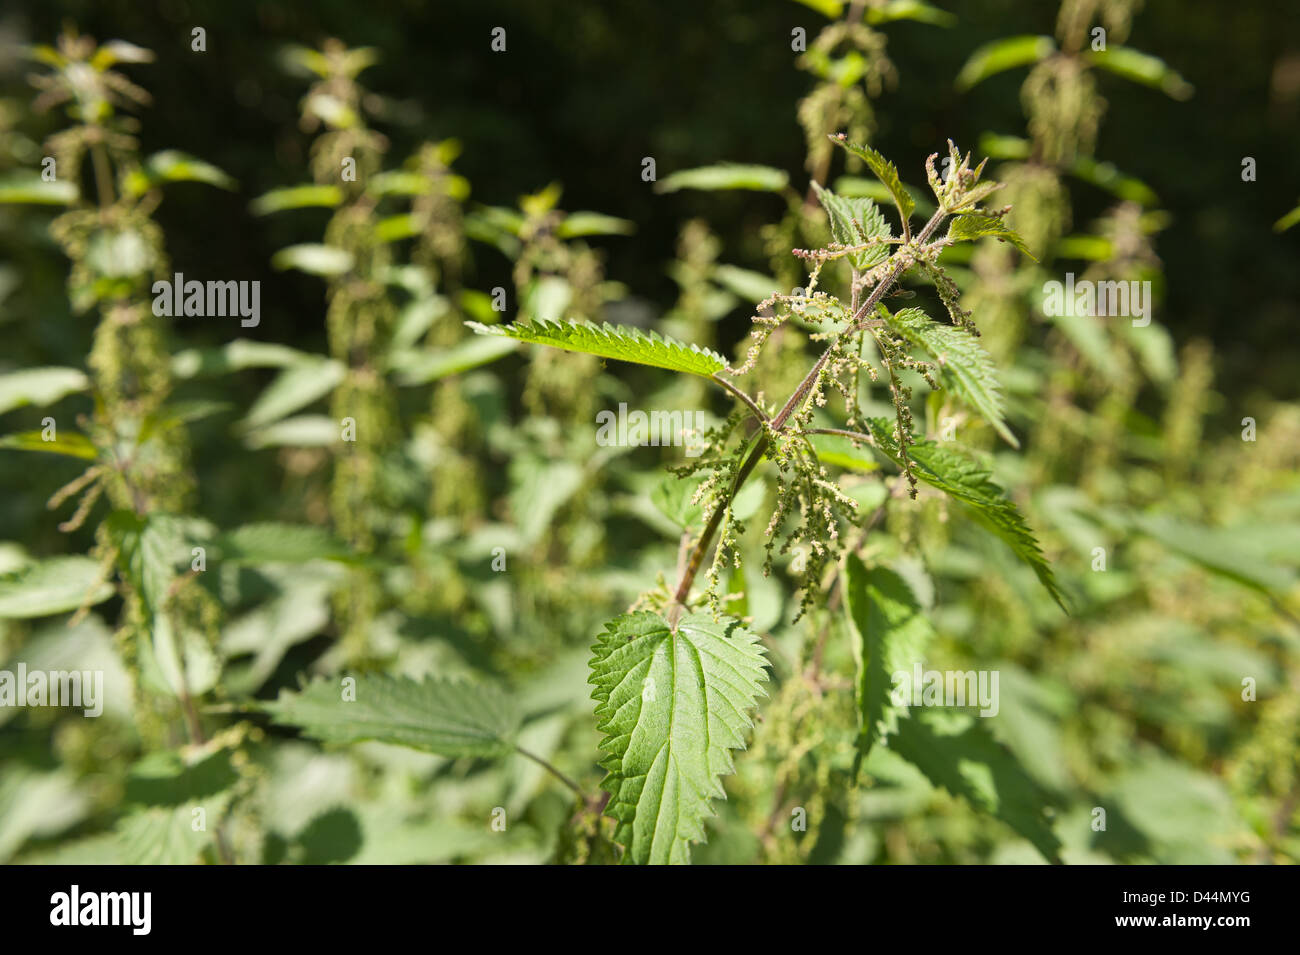 Cause of nettle rash common stinging nettles showing defensive hairs on leaves and green colored flowers hanging from stems Stock Photo